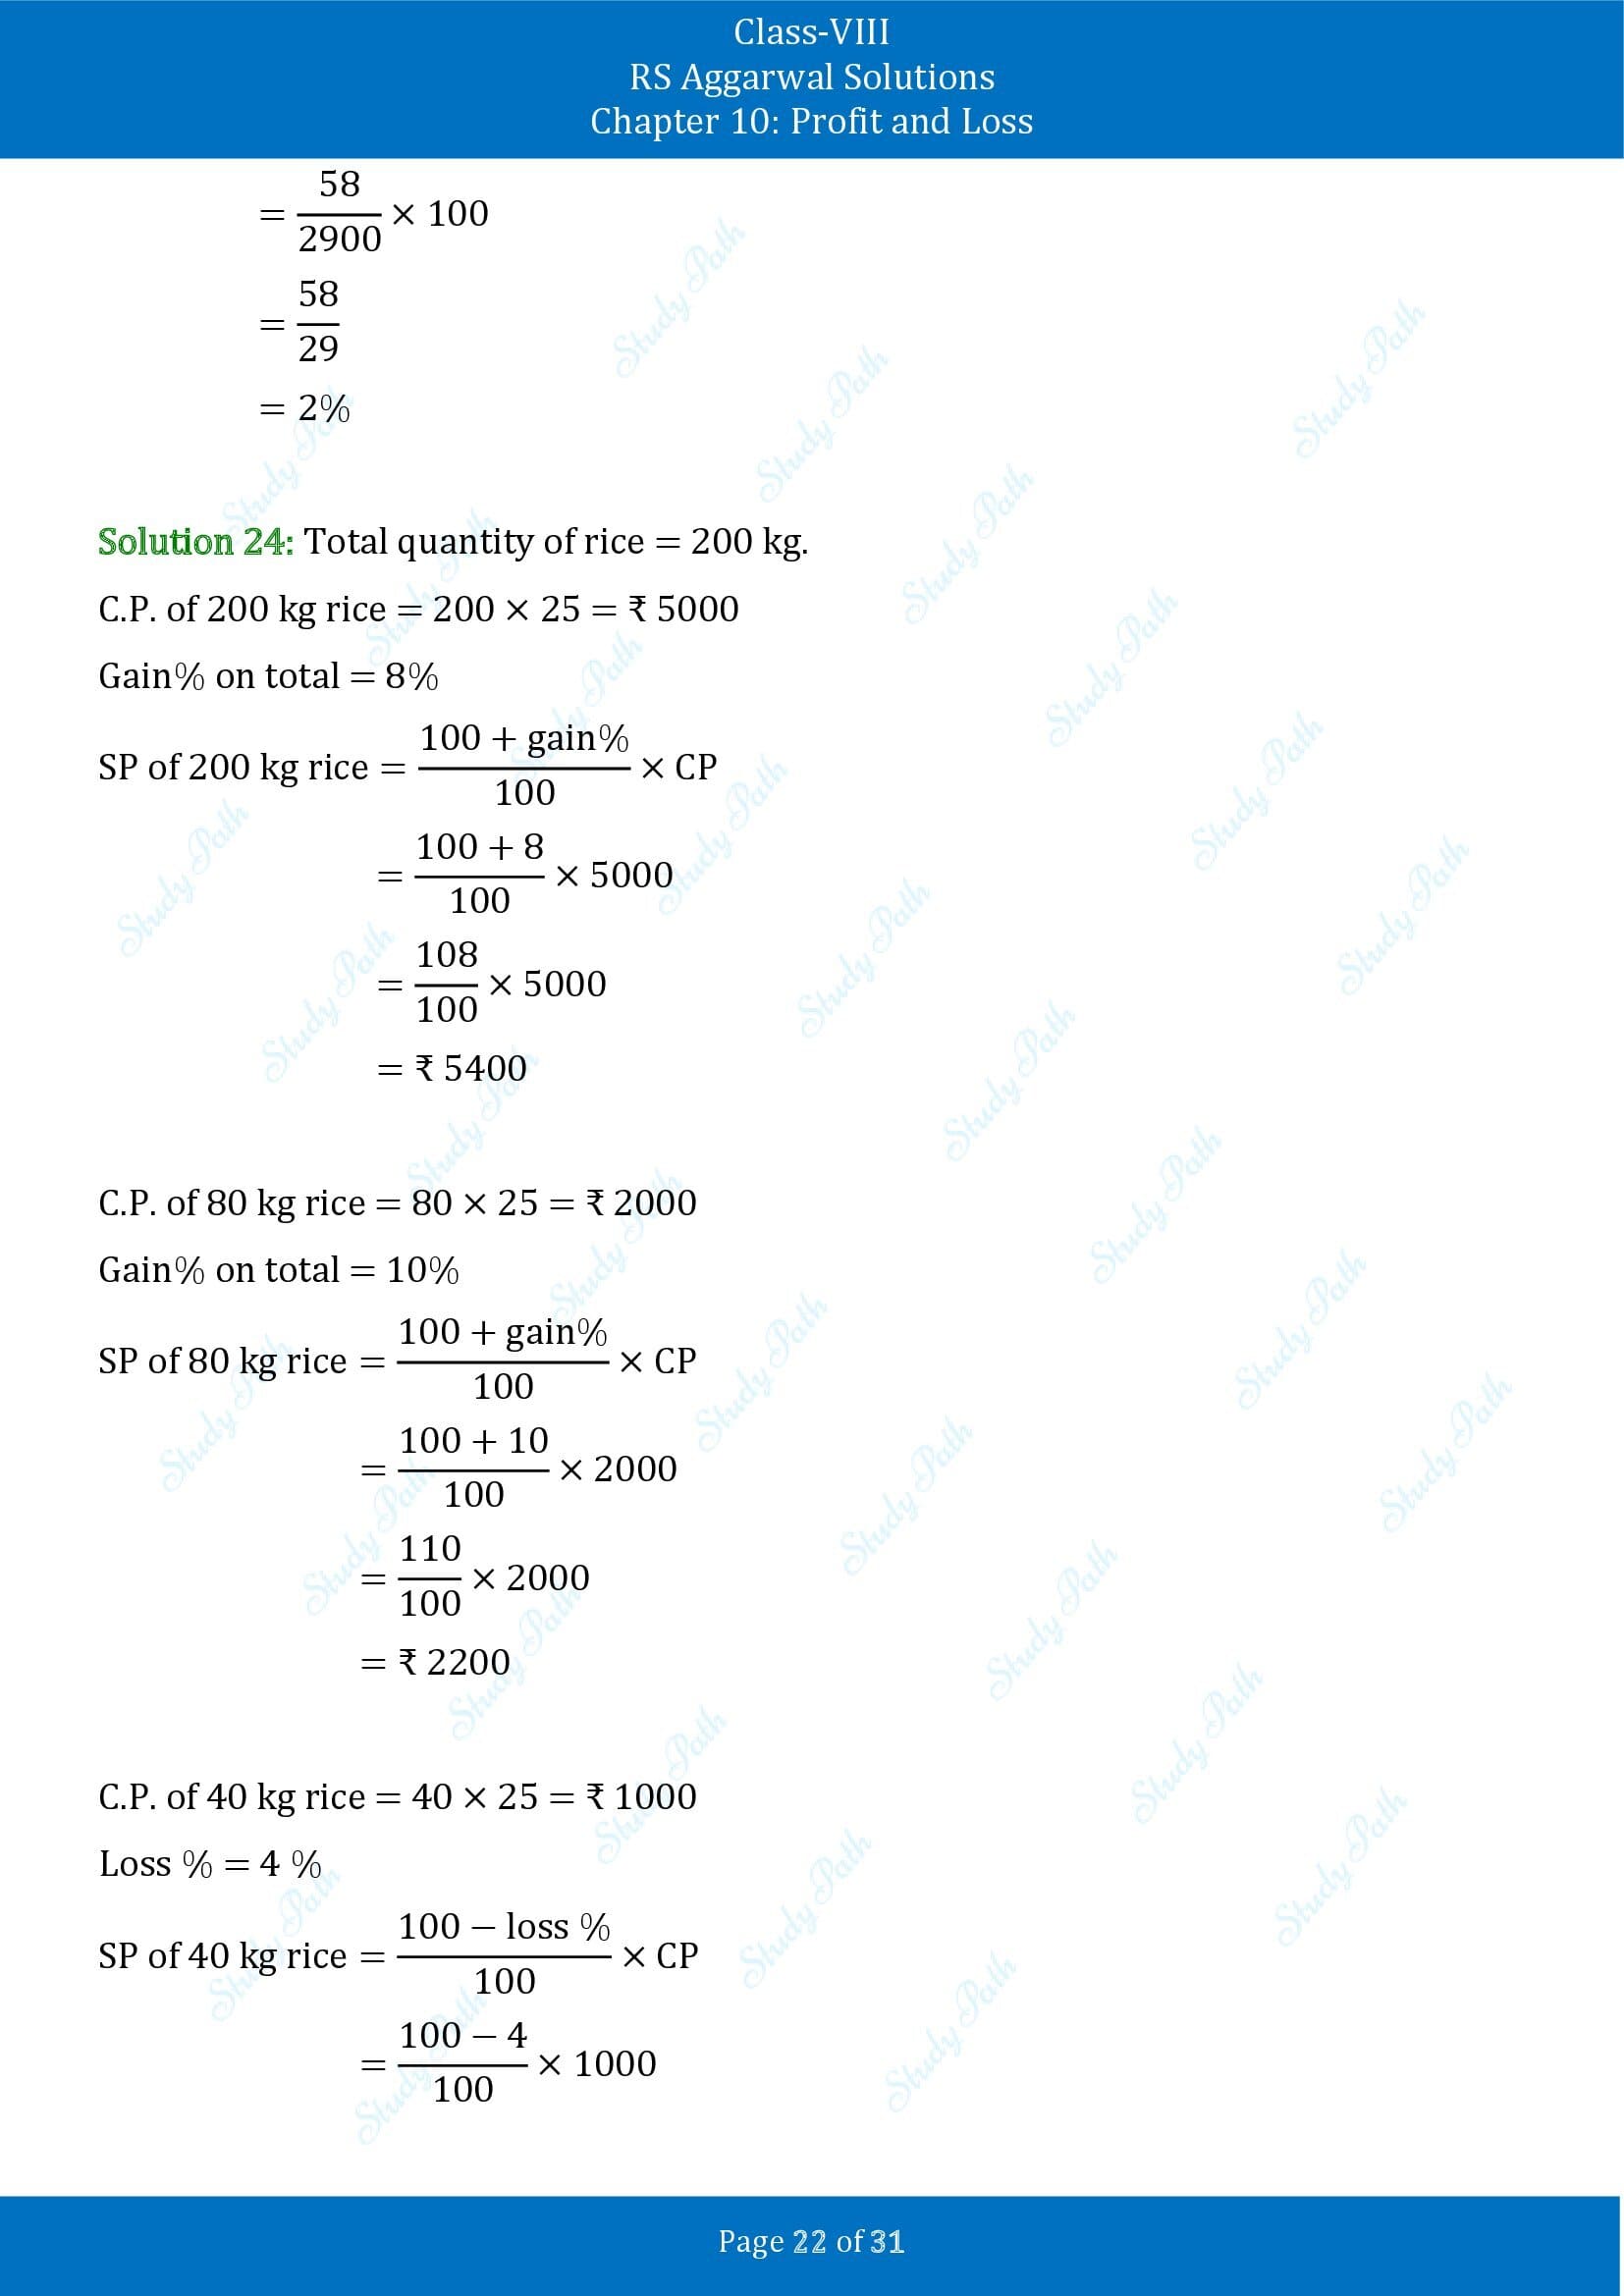 RS Aggarwal Solutions Class 8 Chapter 10 Profit and Loss Exercise 10A 00022